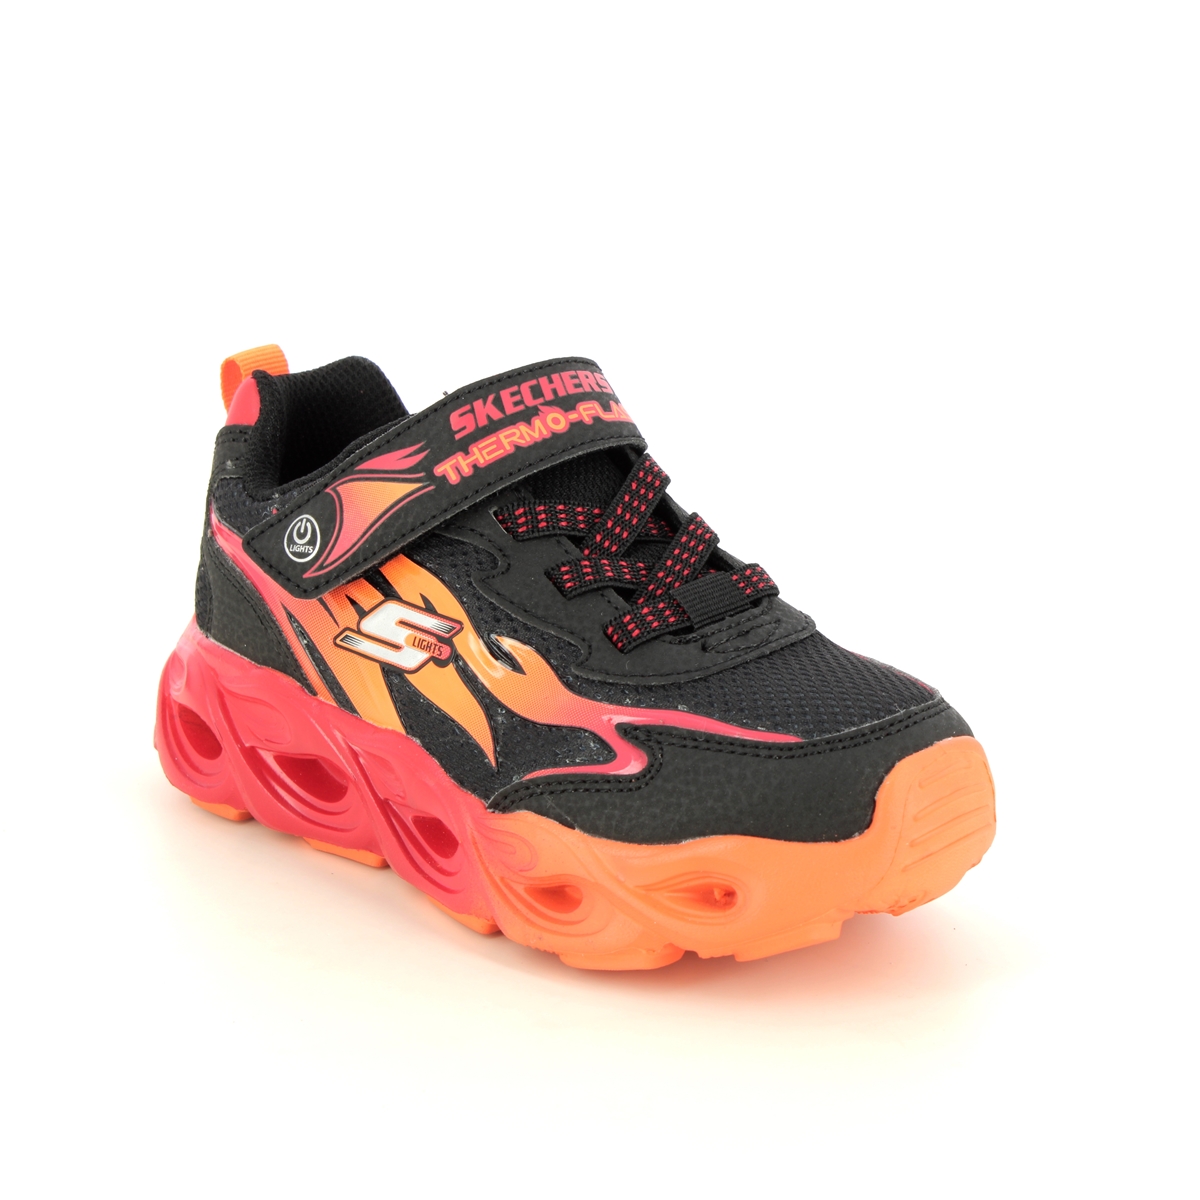 Skechers Thermo Flash Black Red Kids Trainers 400103L In Size 31 In Plain Black Red For kids